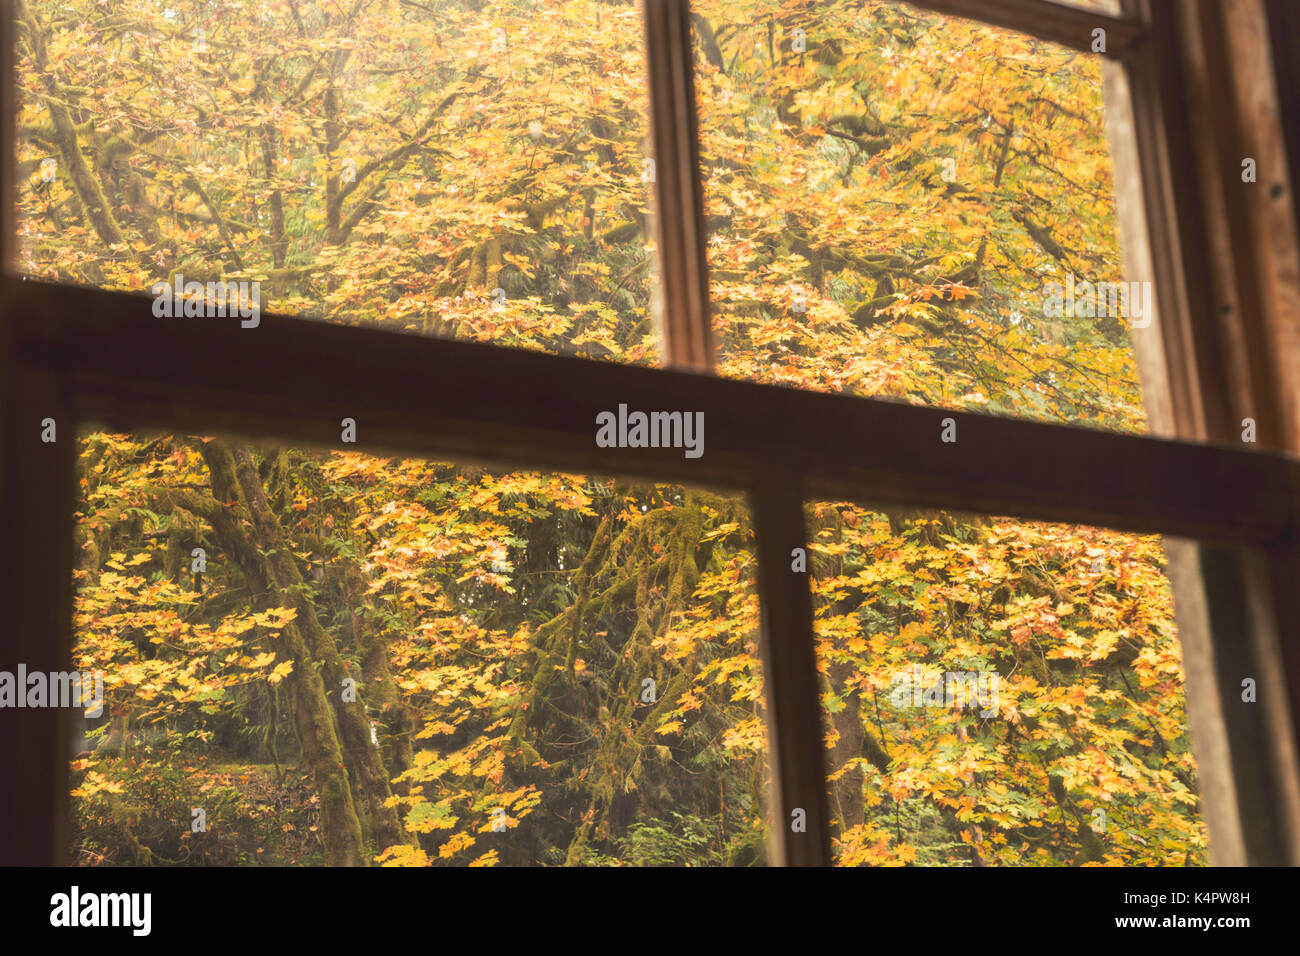 Autumn view, looking outside to the fall foliage viewed through a vintage window Stock Photo